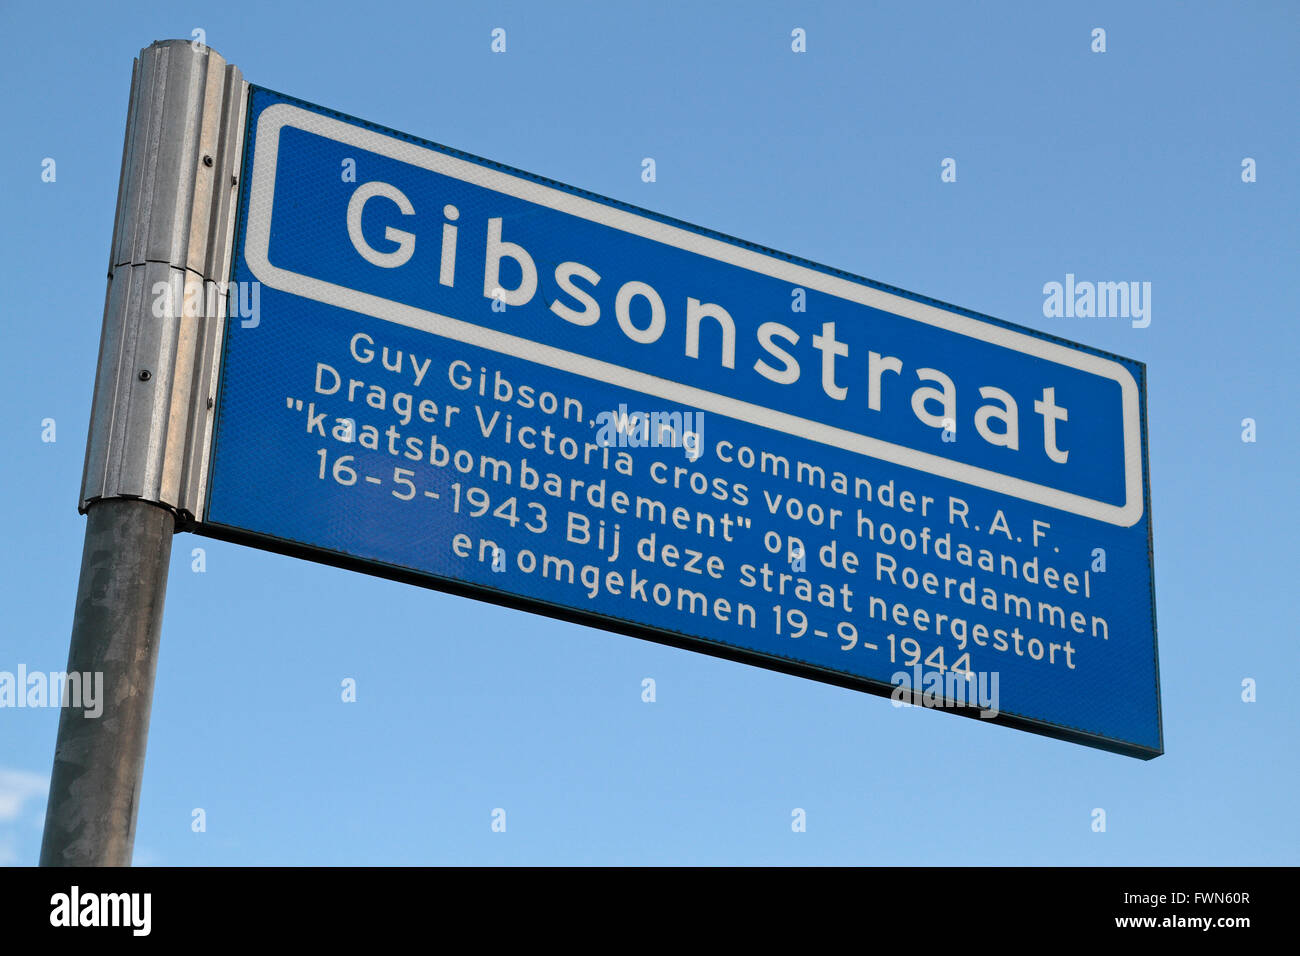 Street name sign close to the site of the crash which killed the WWII RAF pilot, Wing Commander Guy Gibson, Steenbergen Holland. Stock Photo